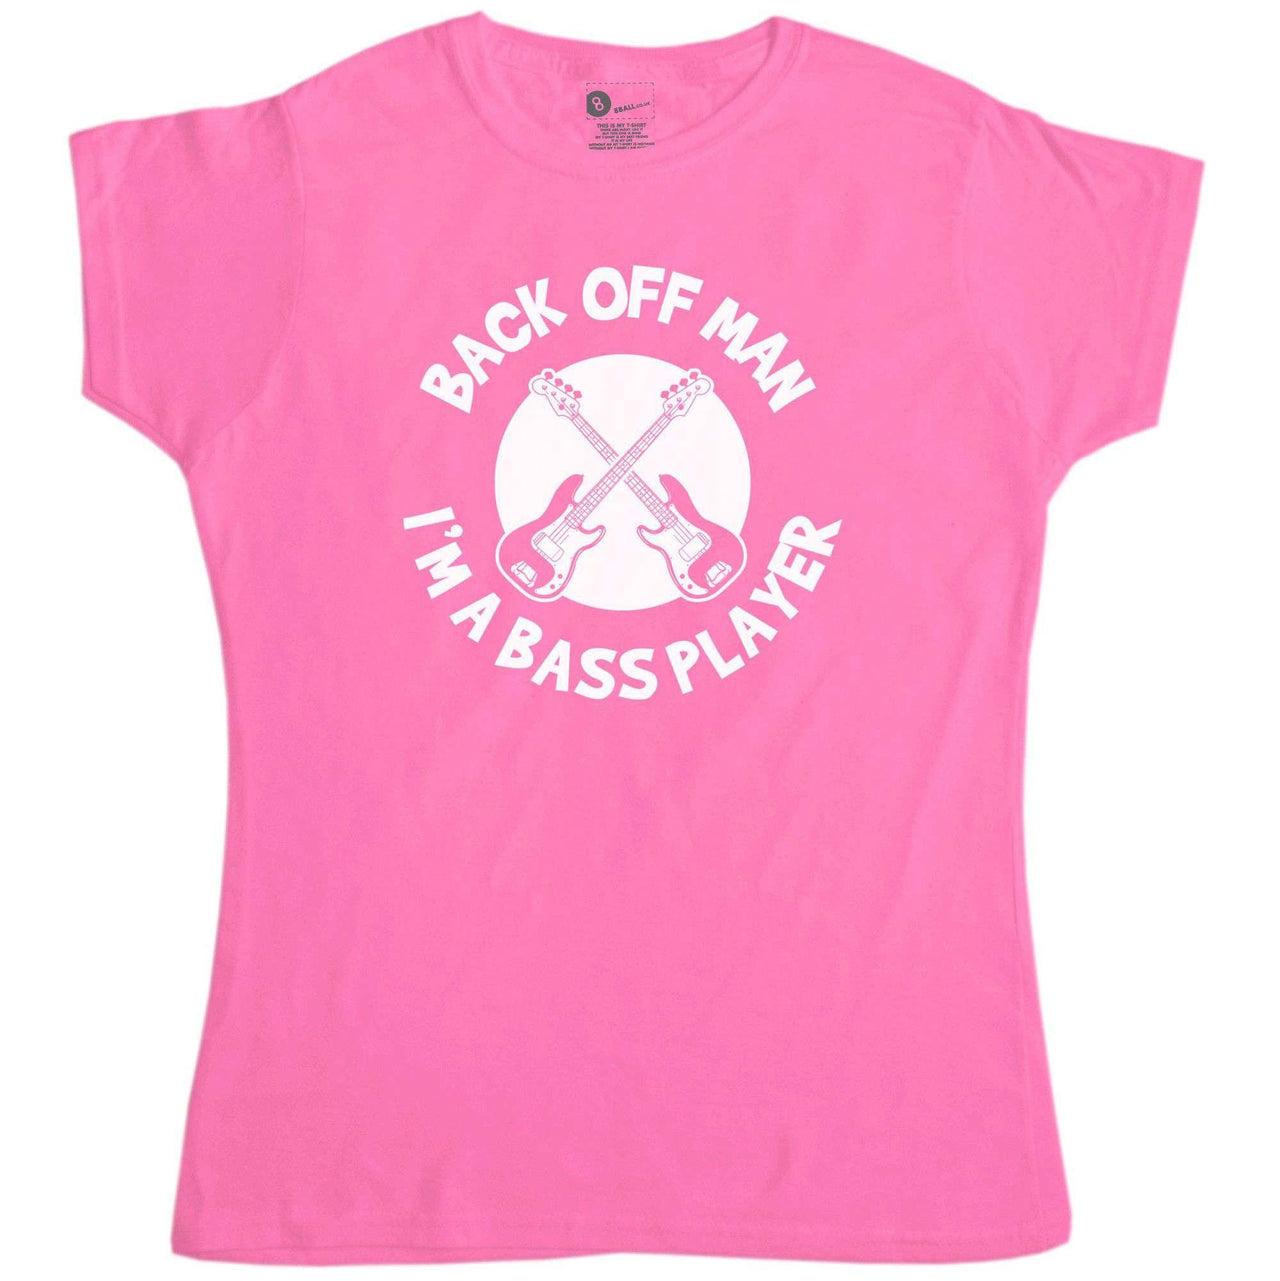 Back Off Man I'm A Bass Player Funny Fitted Womens T-Shirt 8Ball